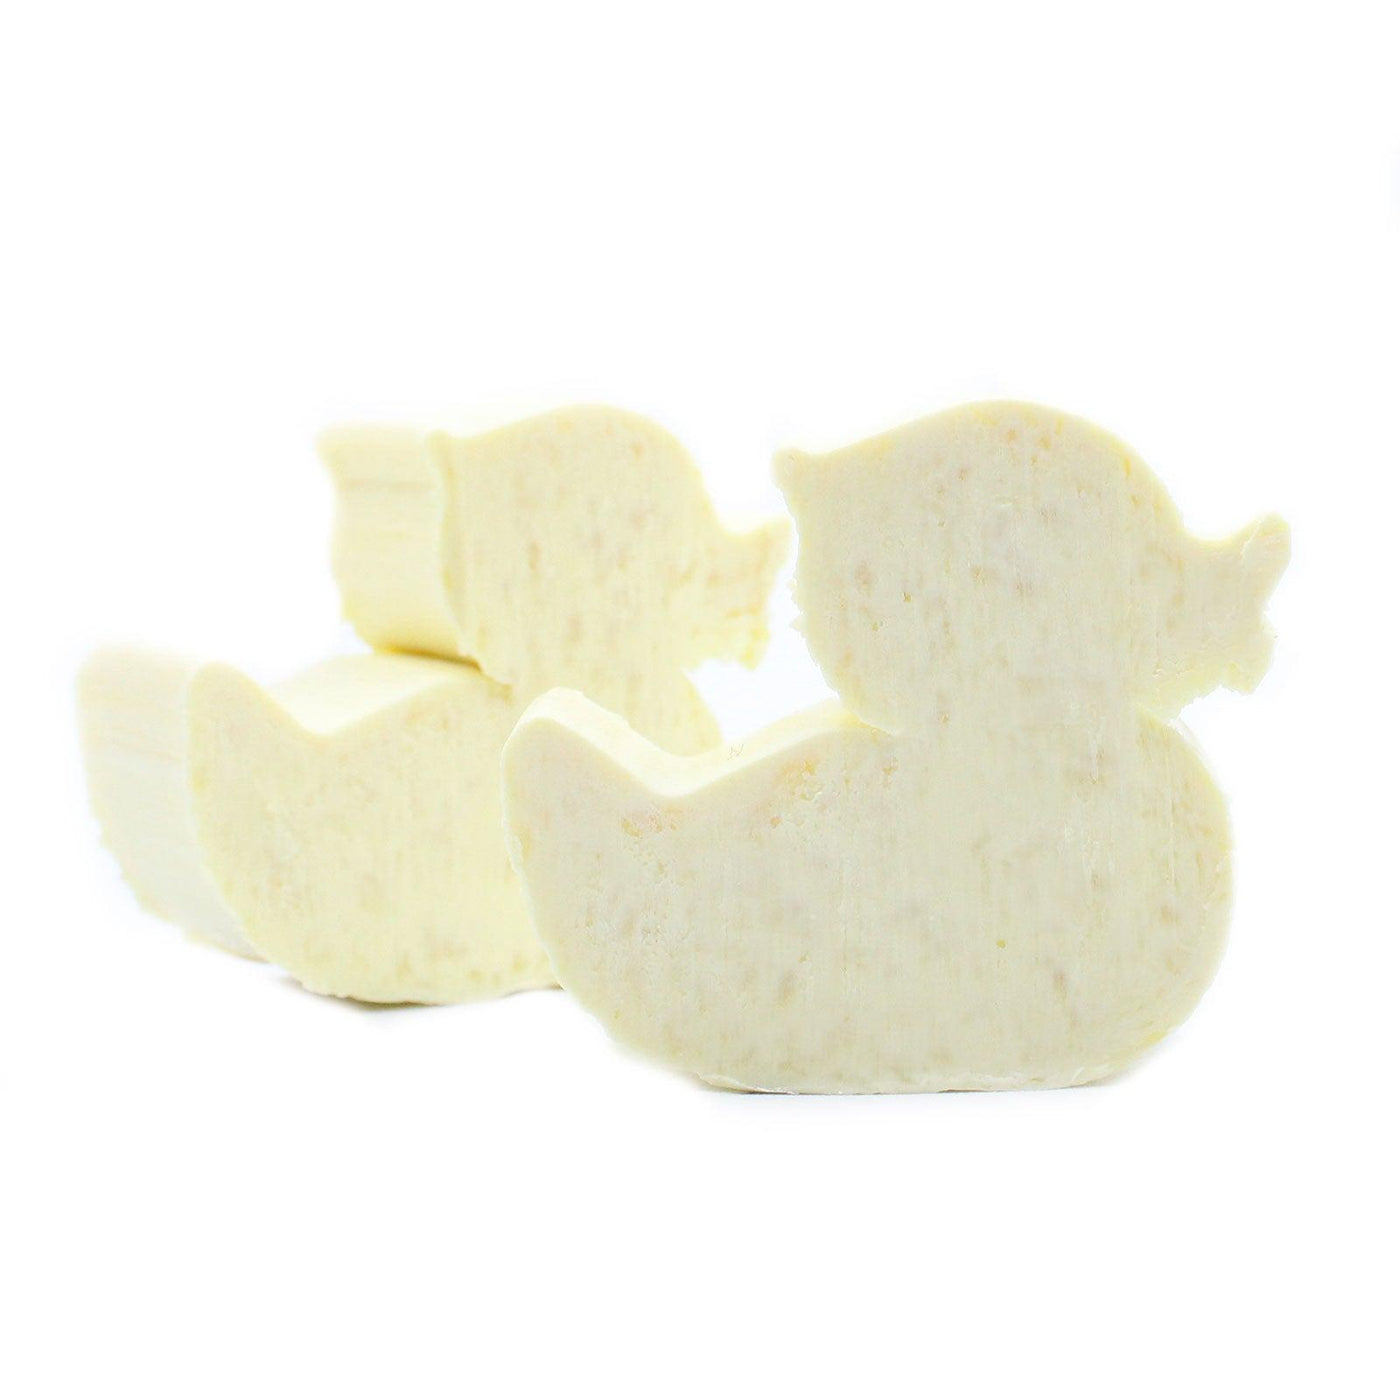 10x Yellow Duck Shaped Paraben Free Fragranced Guest Soaps - Fizzy Peach.